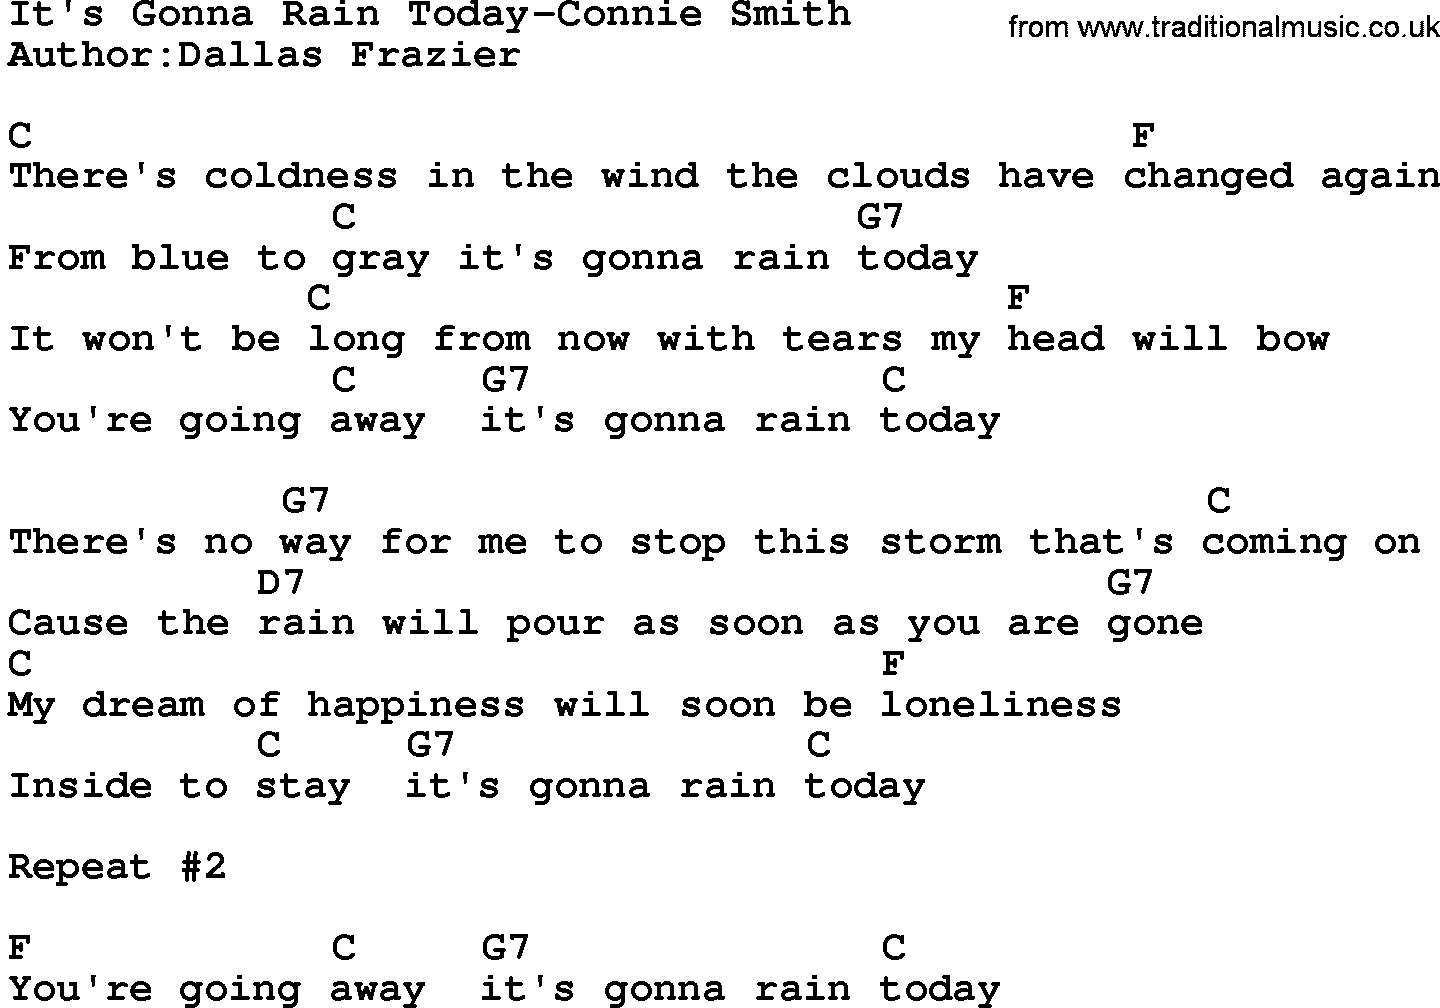 Country music song: It's Gonna Rain Today-Connie Smith lyrics and chords